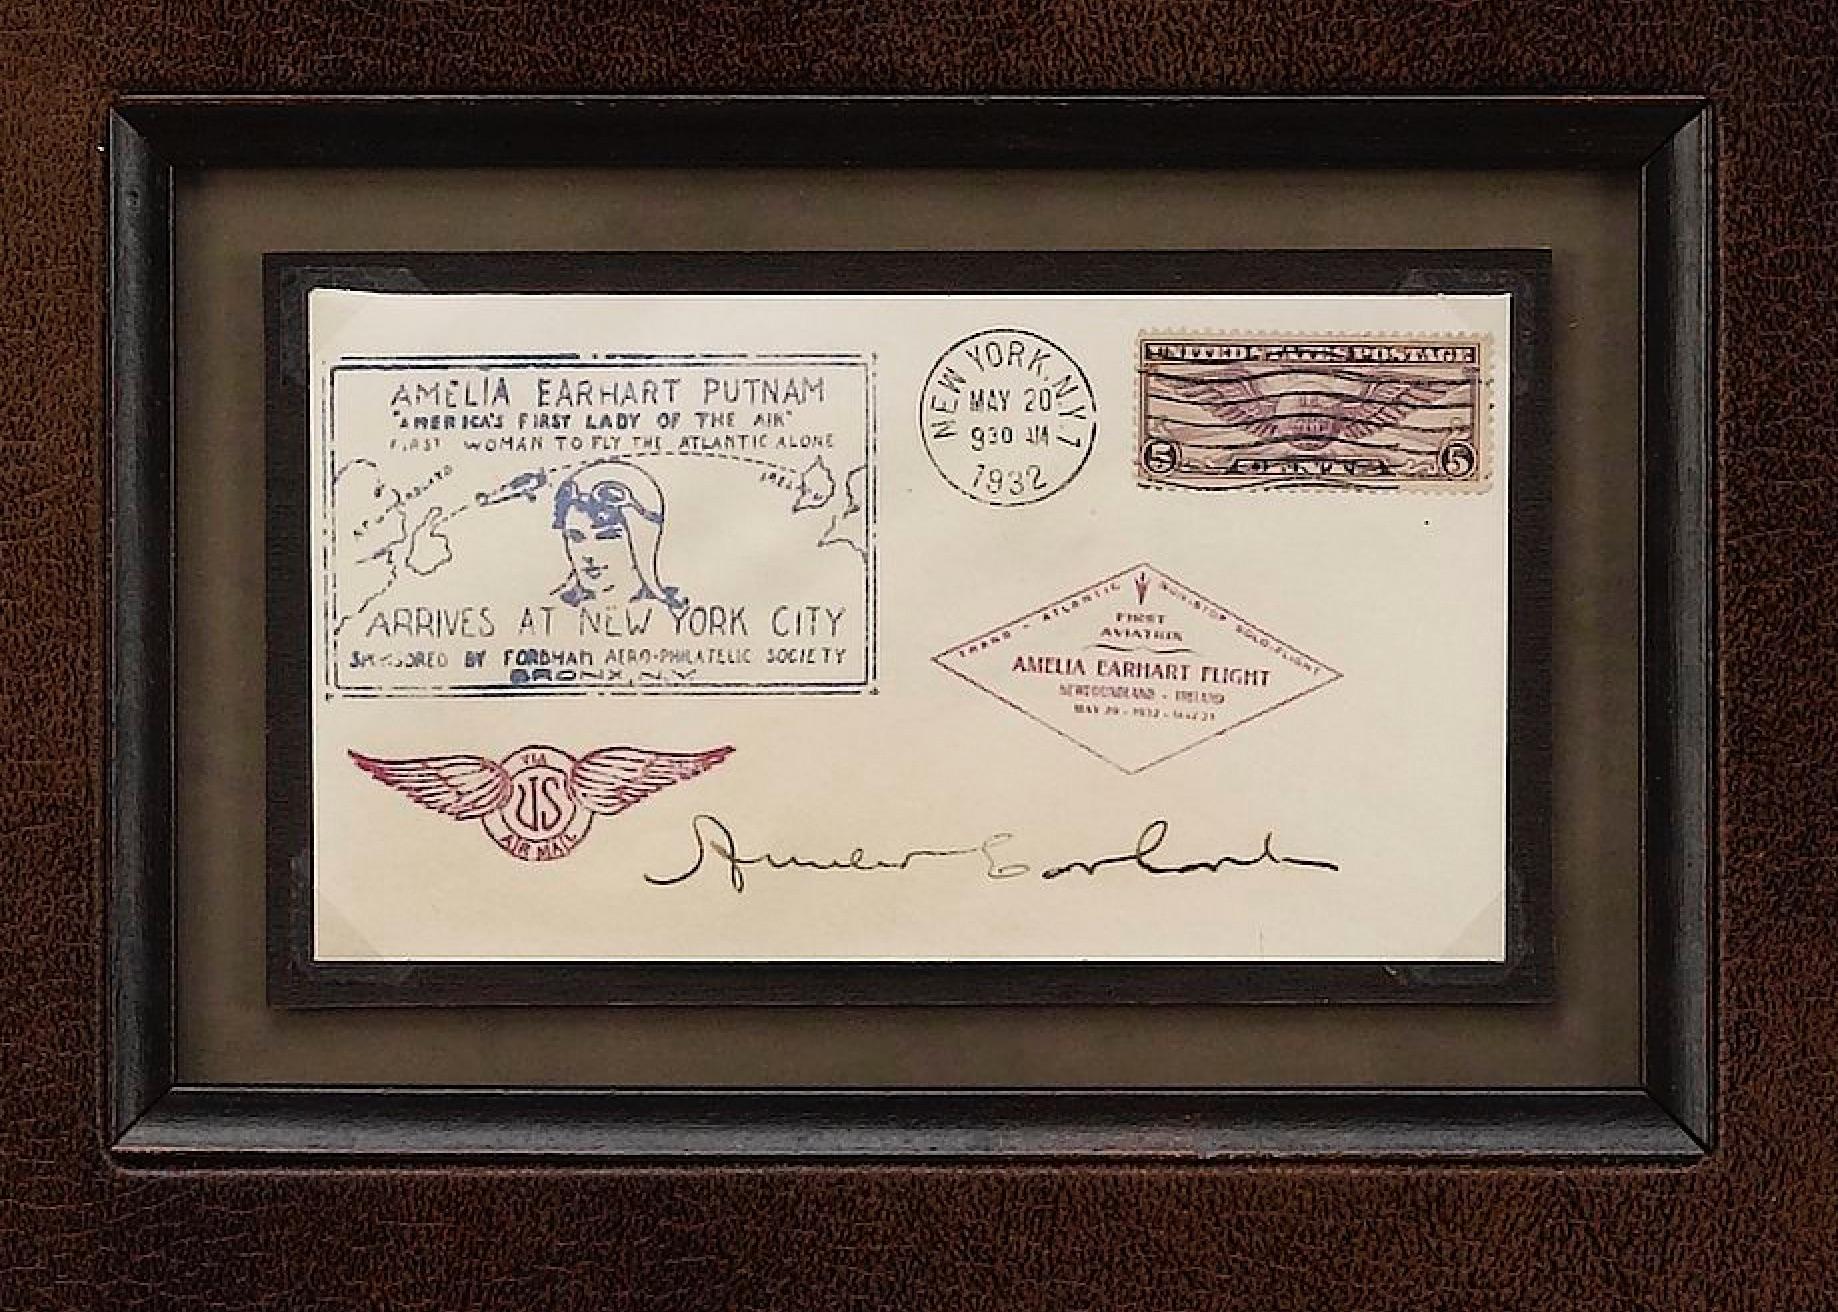 This is a custom collage featuring a first day Postal Cover signed by Amelia Earhart. The collage celebrates Earhart's famous transatlantic journey. The first day cover is dated May 20, 1932 in New York and autographed by Amelia Earhart with full